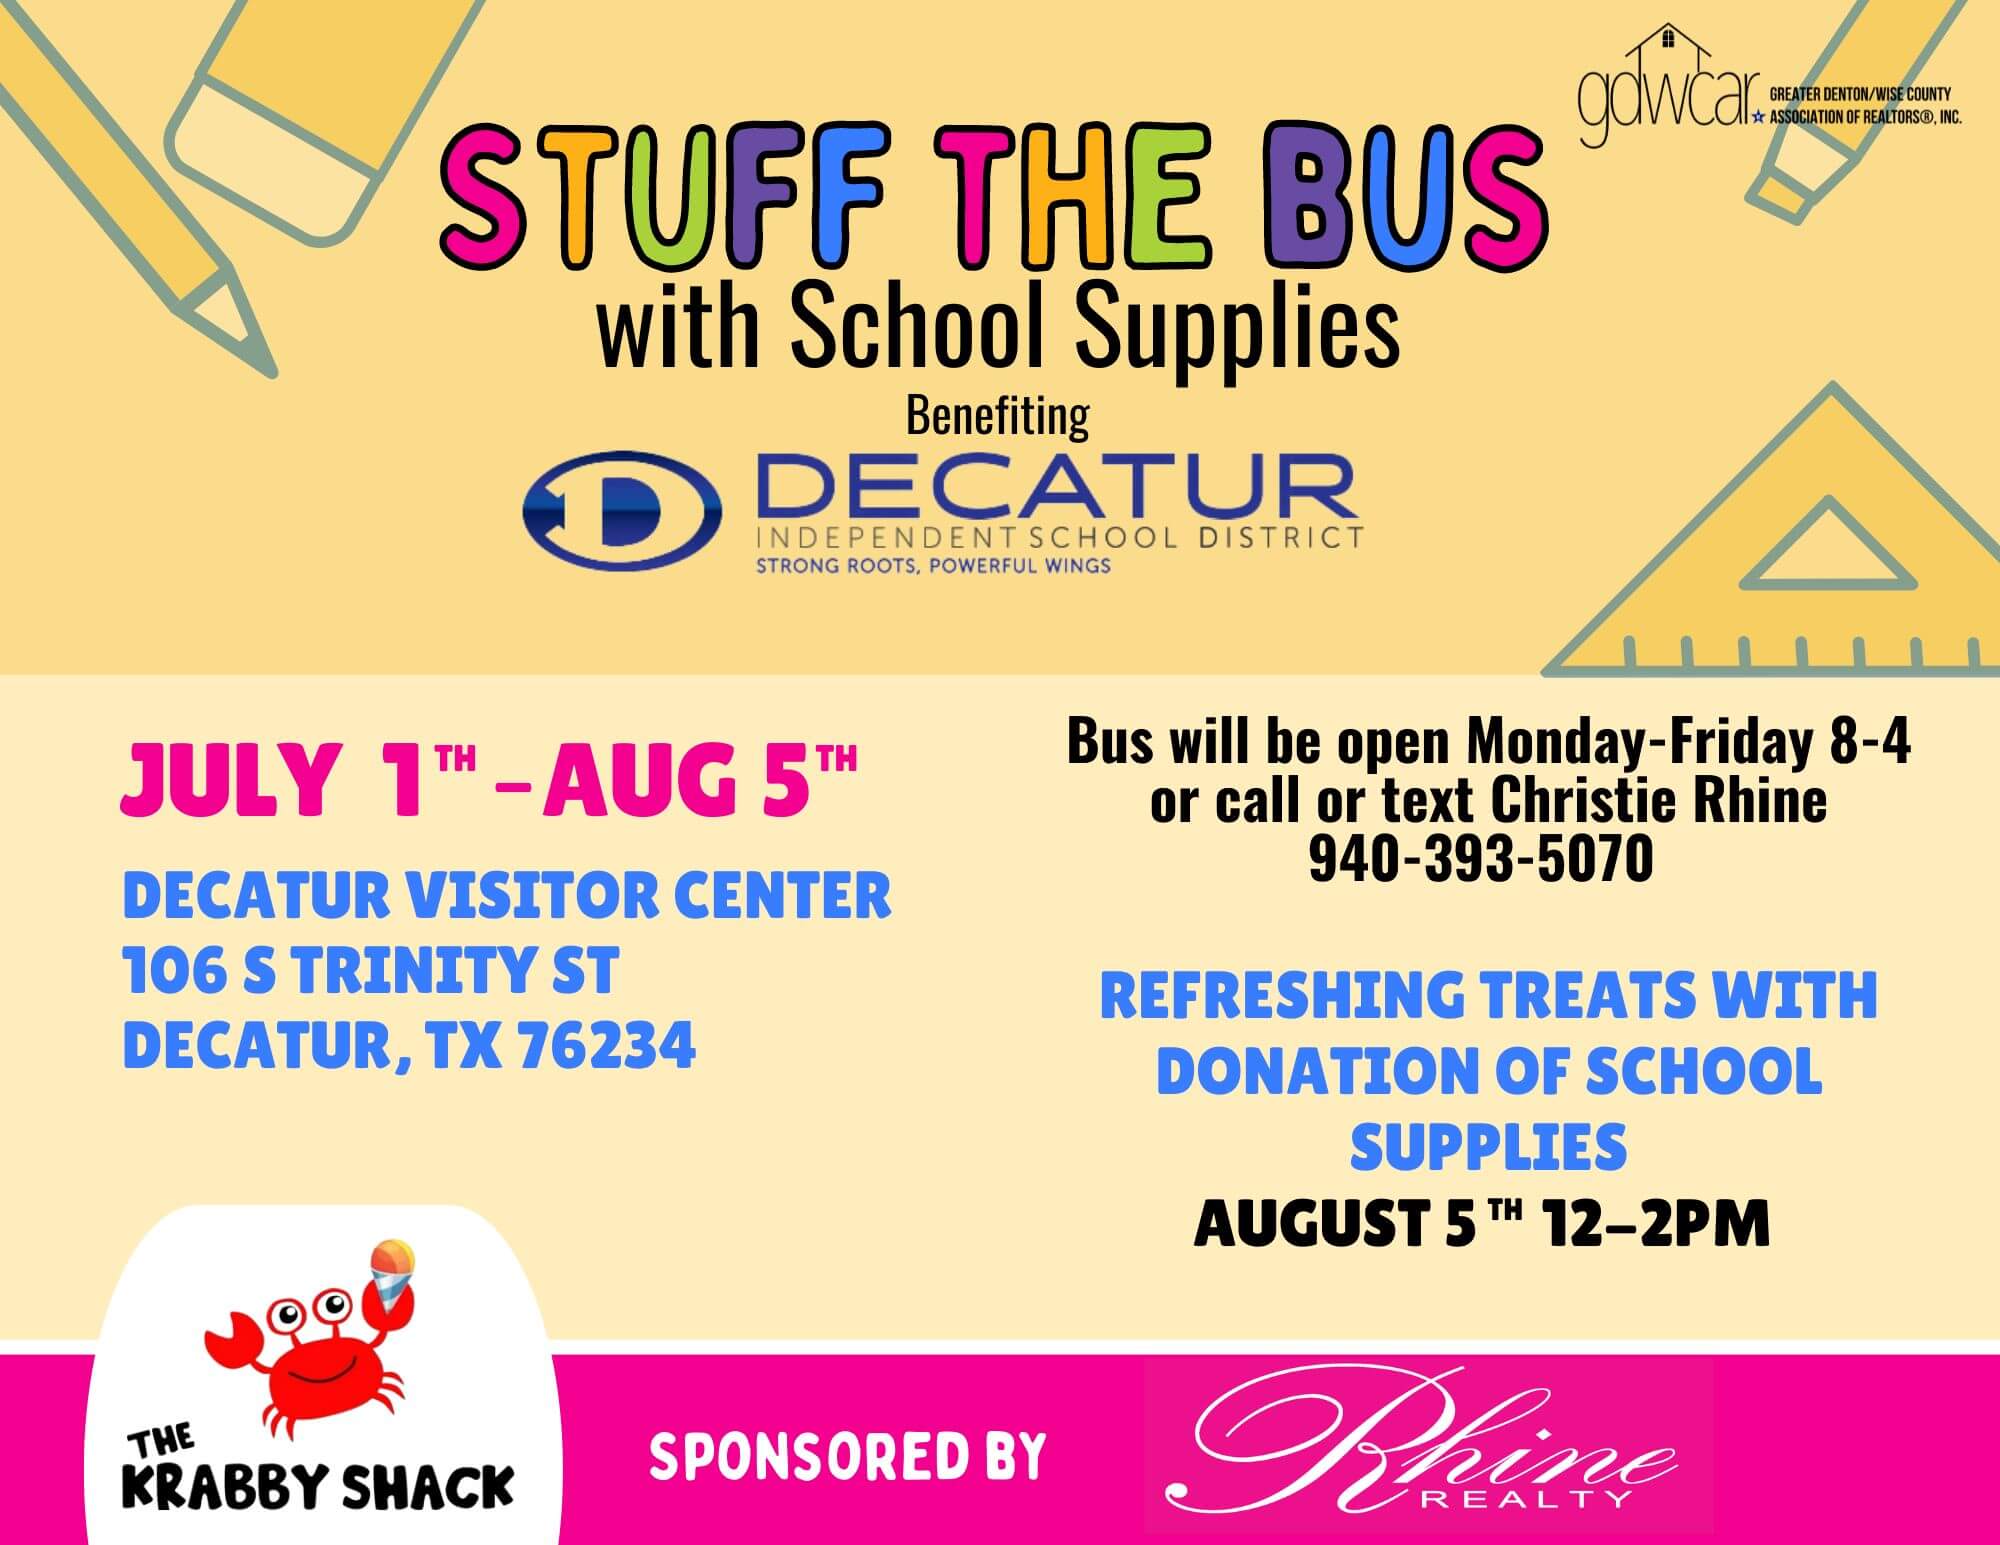 Decatur ISD School Supply Drive. Free treat with donation of school supplies on August 5th.